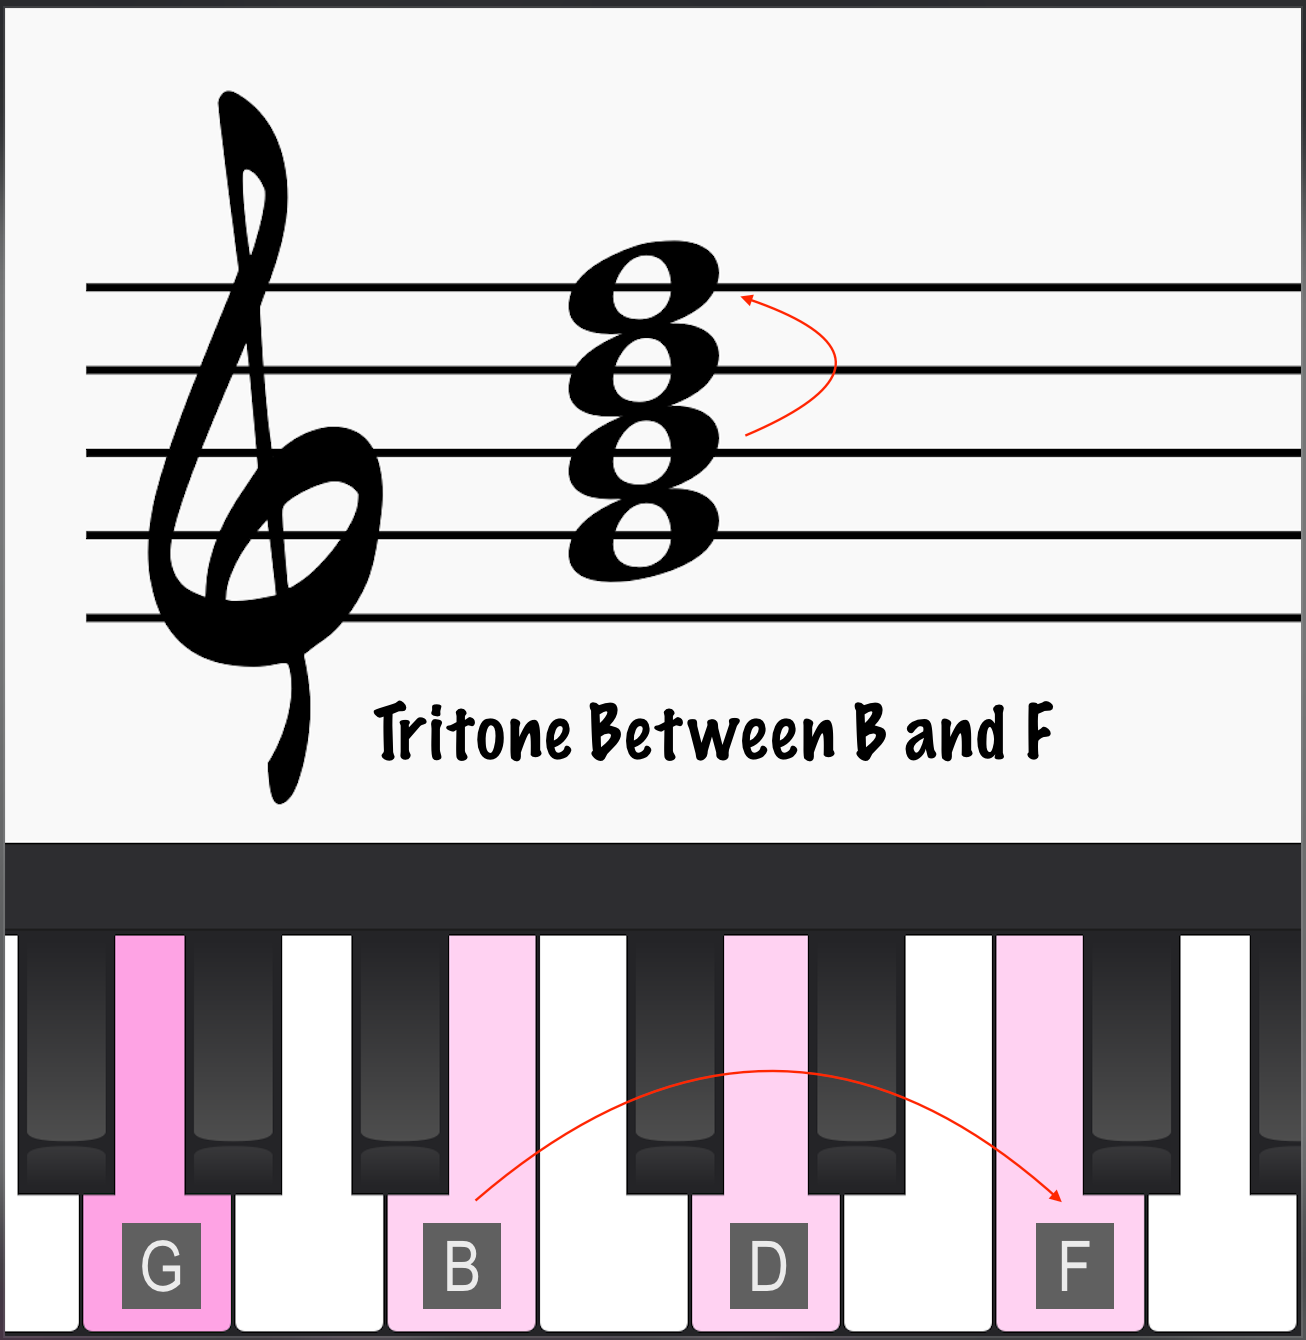 G7 chord showing the tritone between B and F